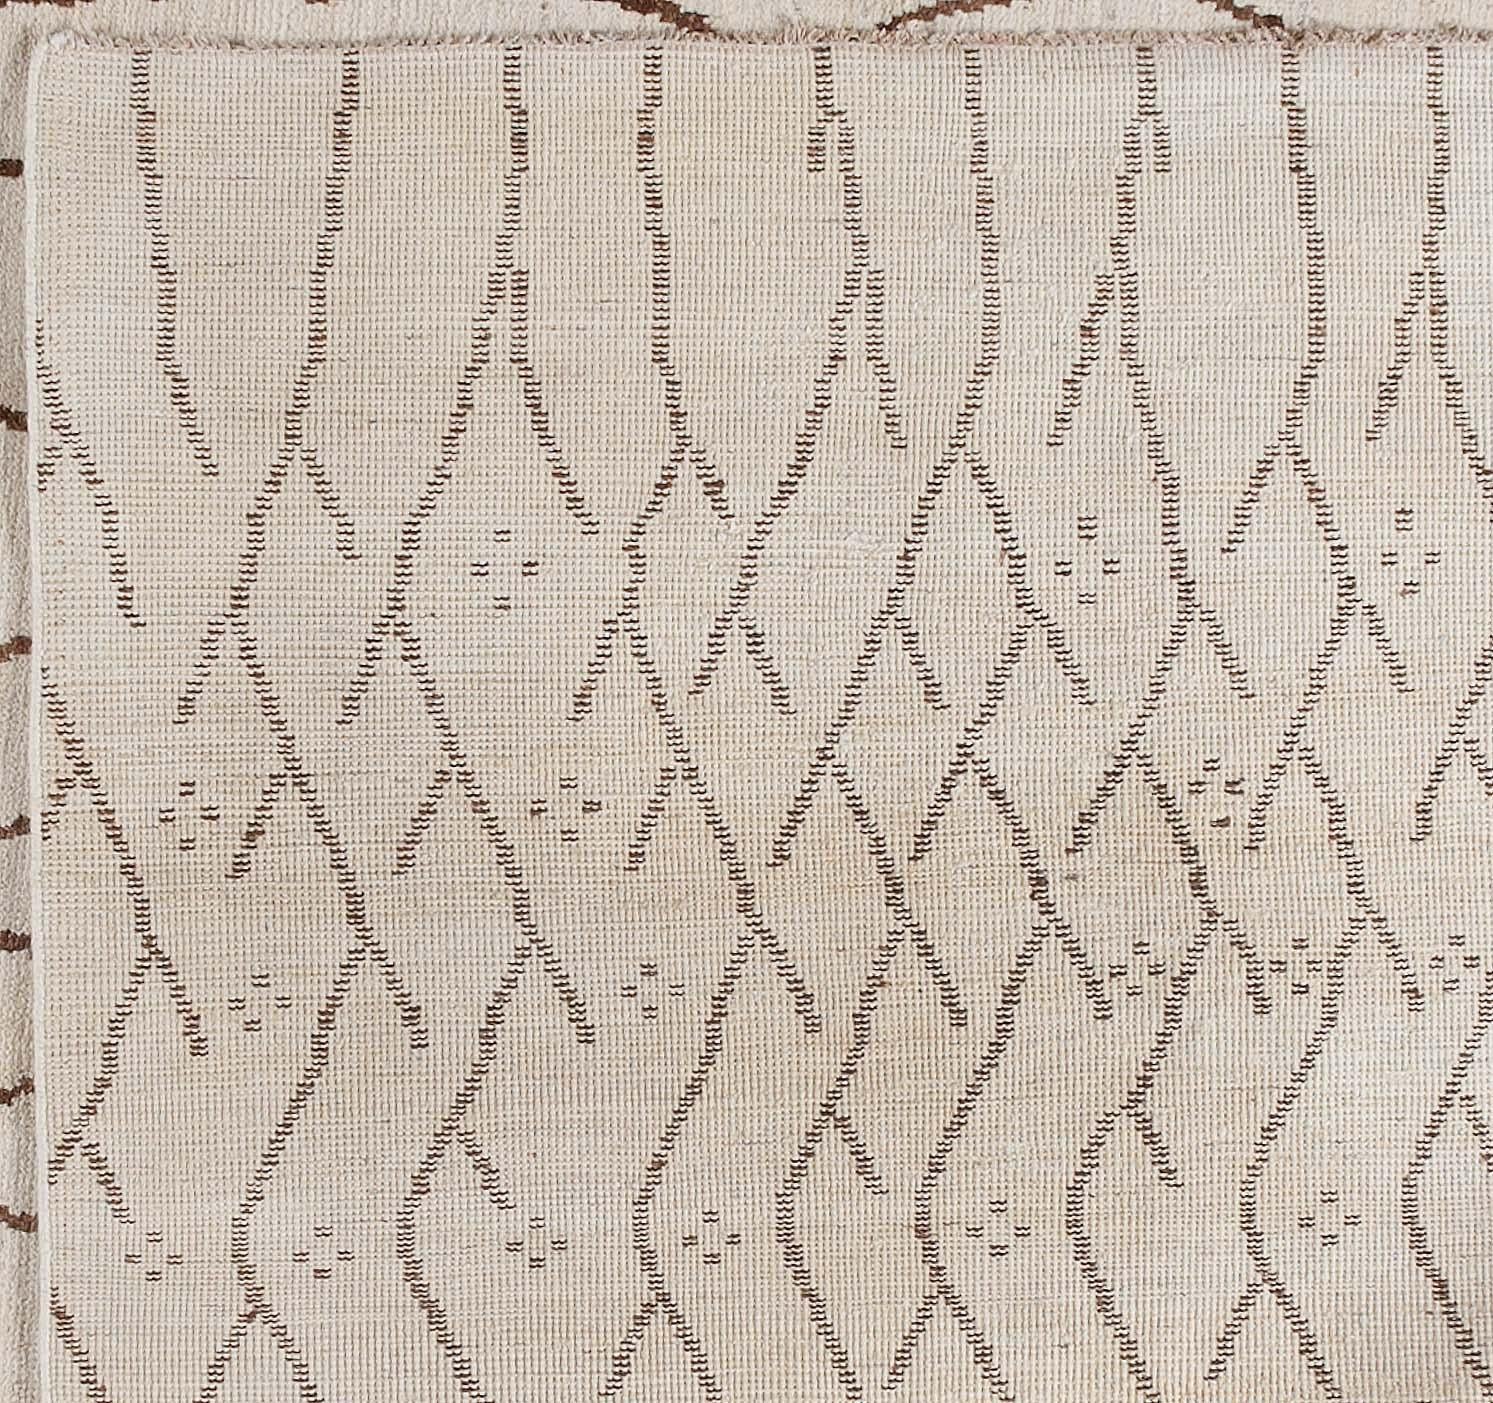 This simple Moroccan design with lines and shapes in contrasting brown and sand makes for a truly eye-catching piece. Hand knotted in Pakistan from a traditional Moroccan design. Wool.